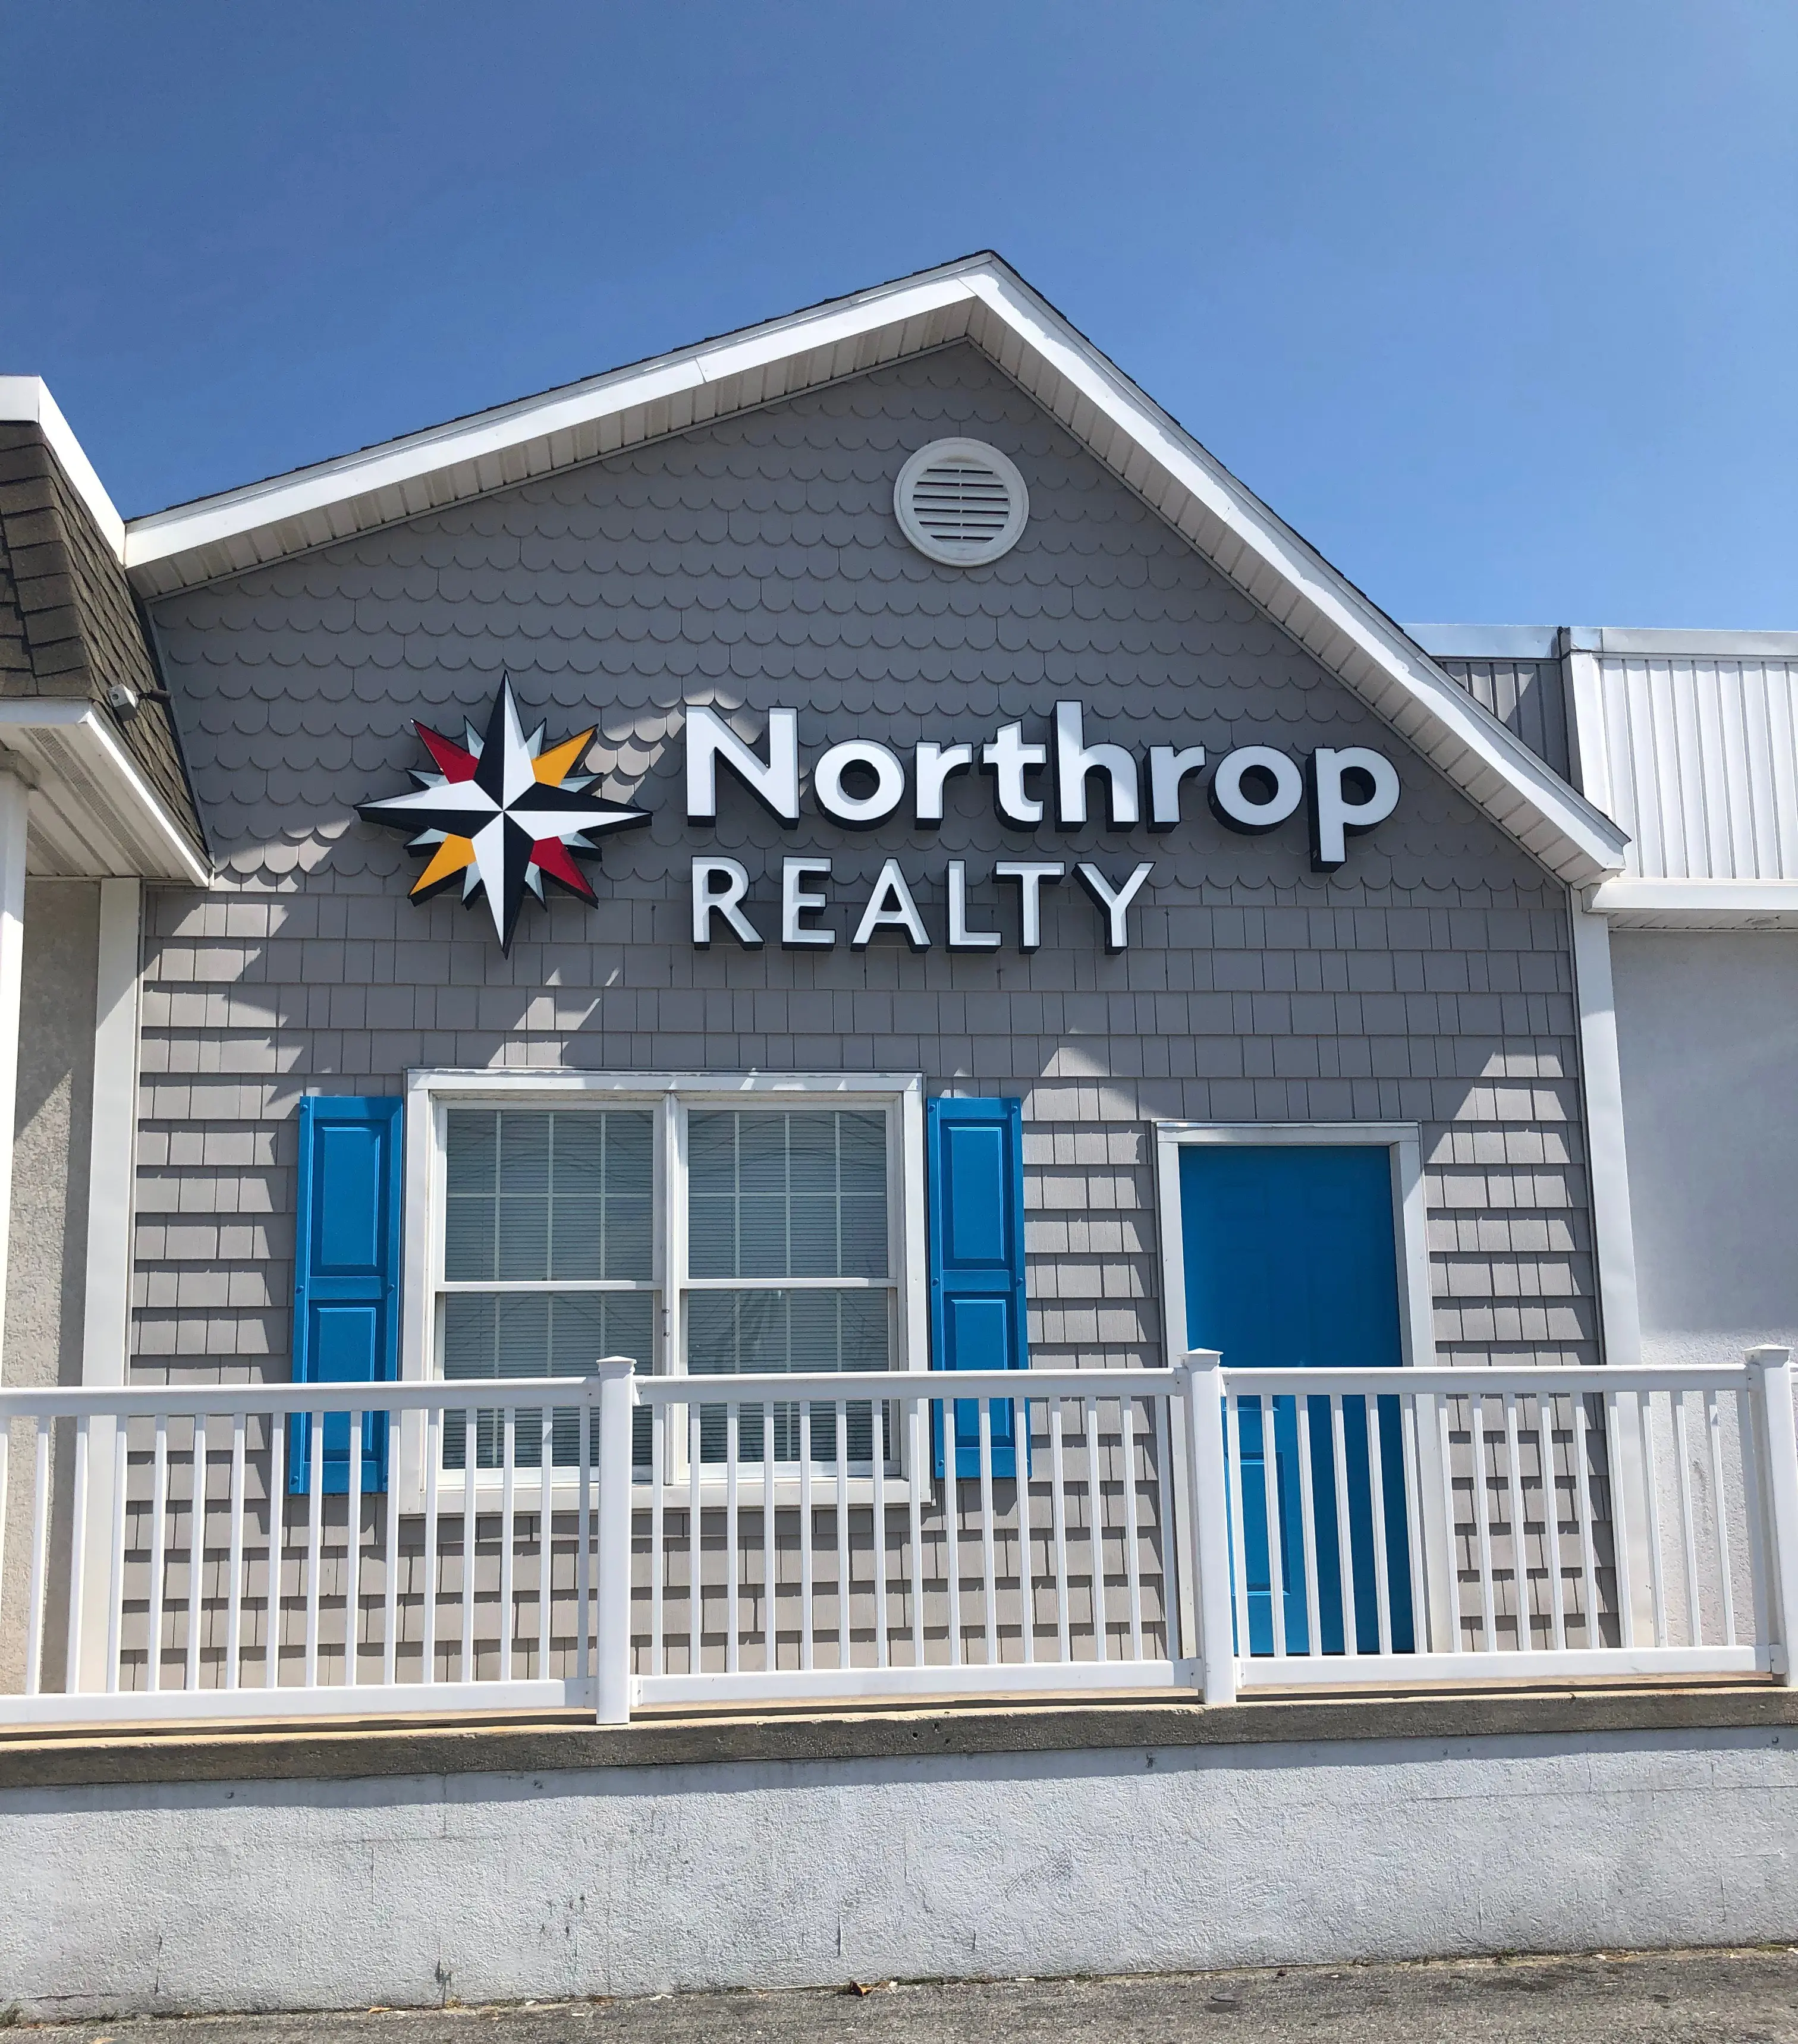 Northrop Realty opens first office in Delaware